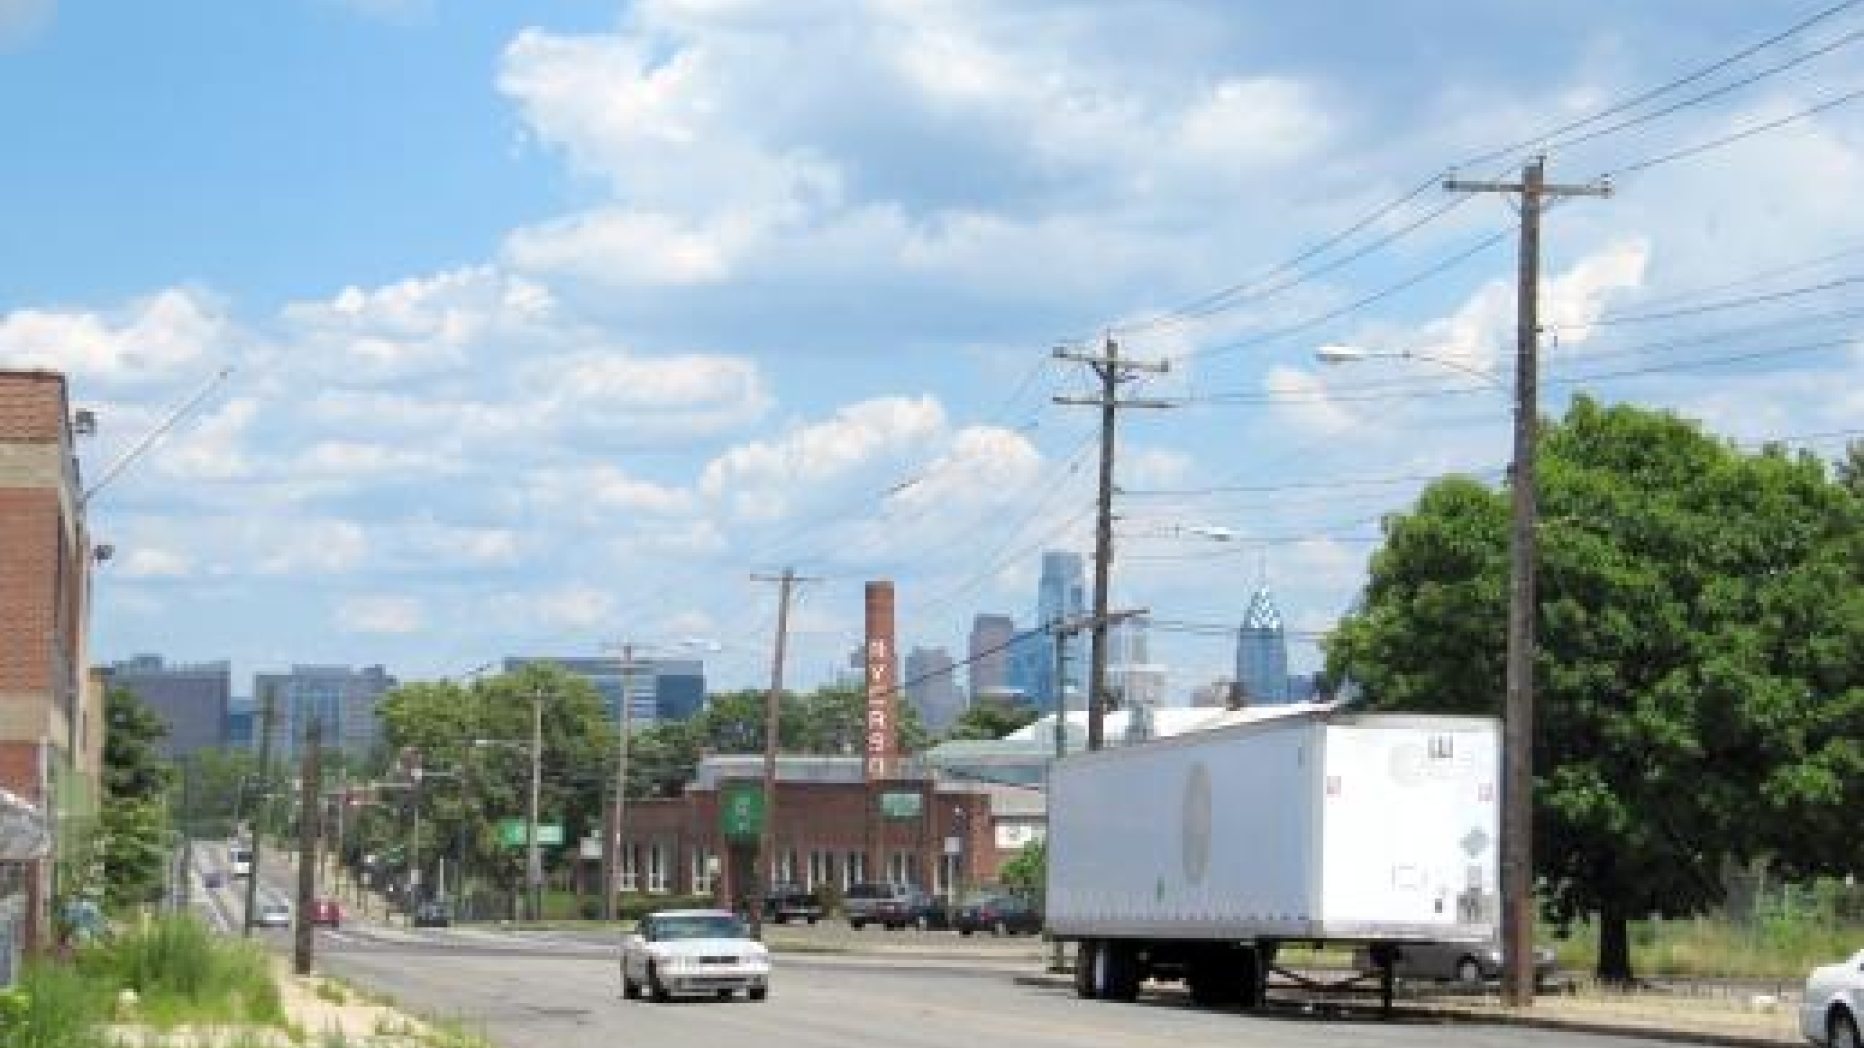 A street view in West Philadelphia with Center City in the background.